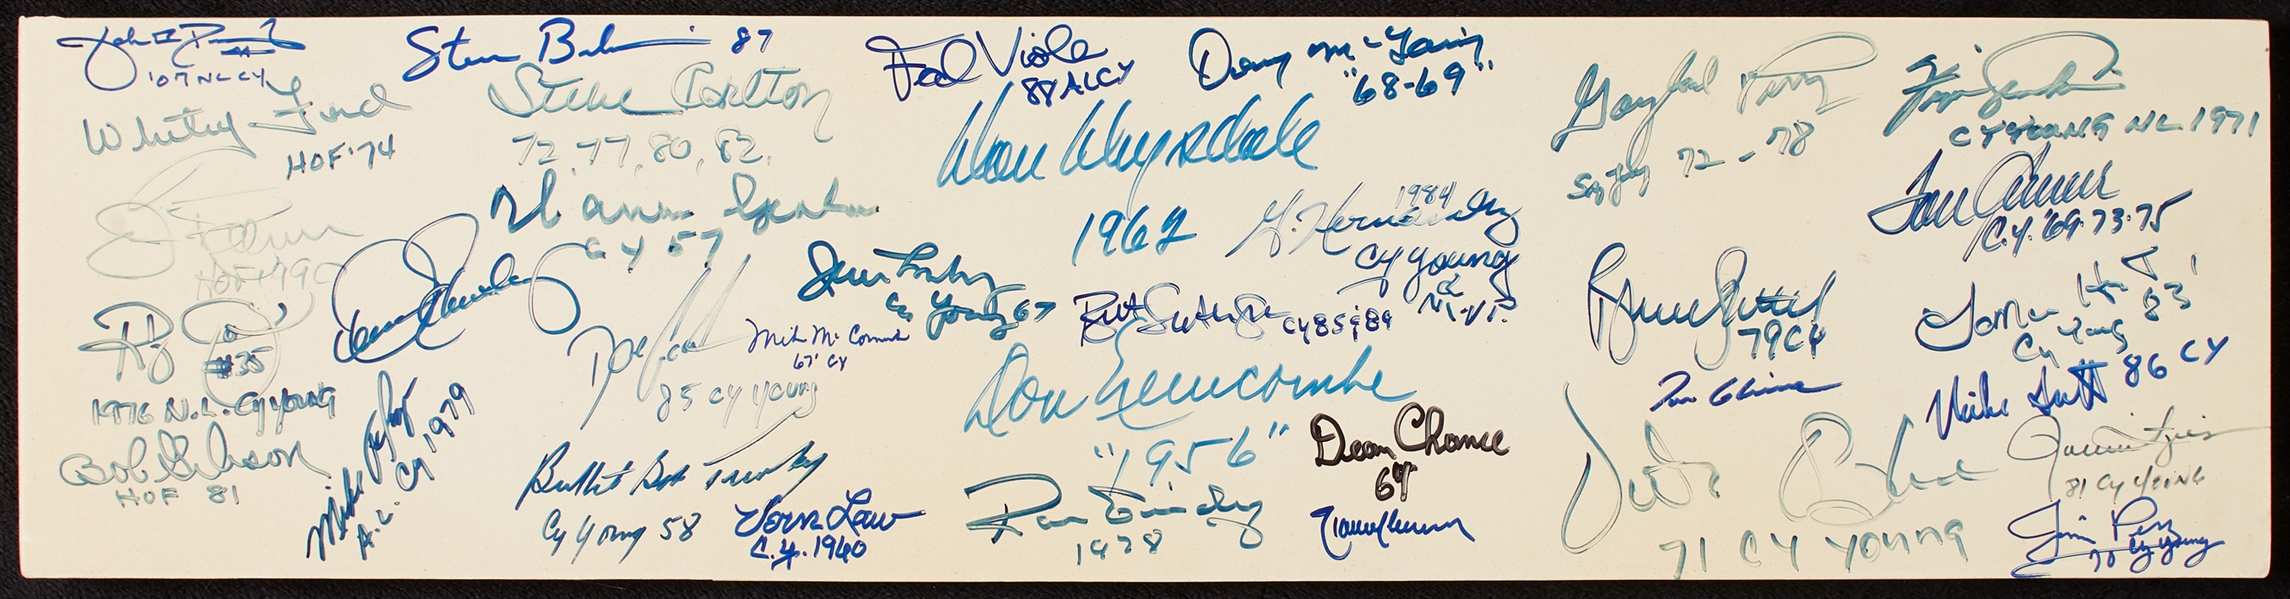 Cy Young Winners Multi-Signed Pitching Rubber (34) (BAS)